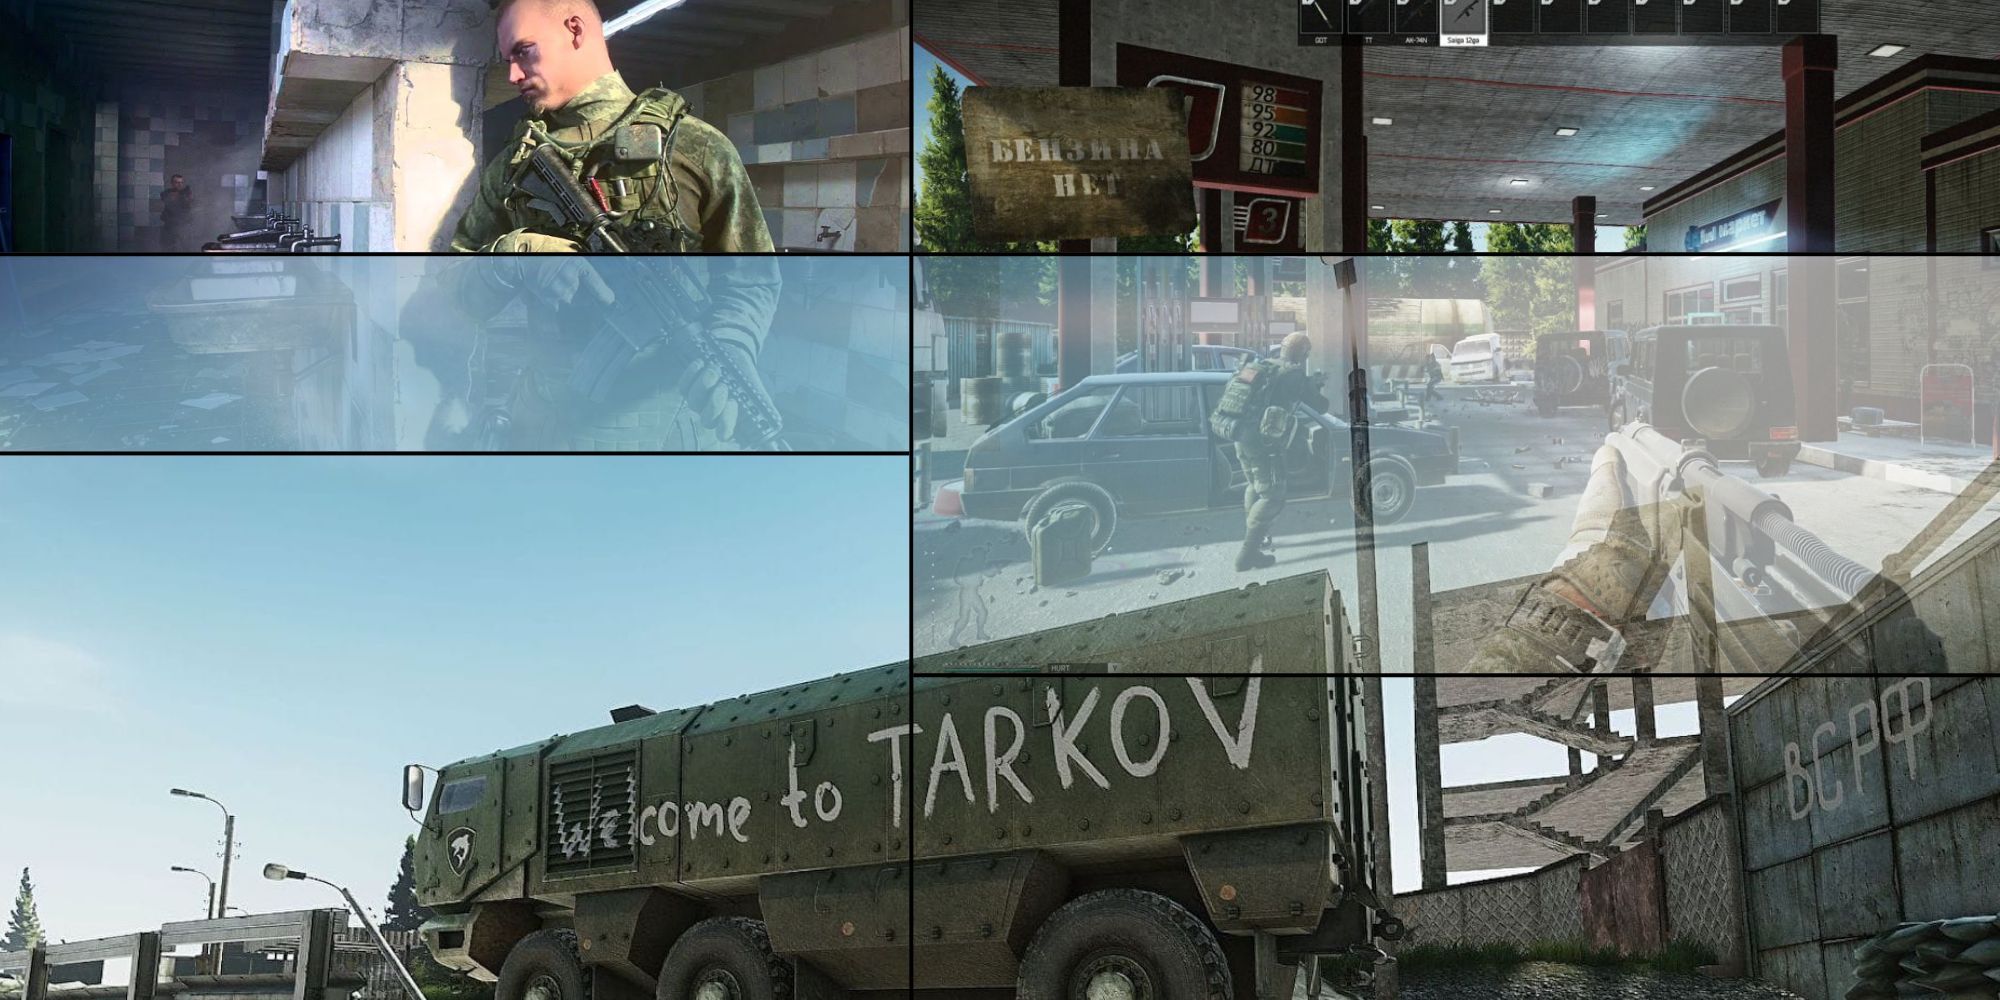 escape from tarkov different panels with guns, standoff, and vehicle